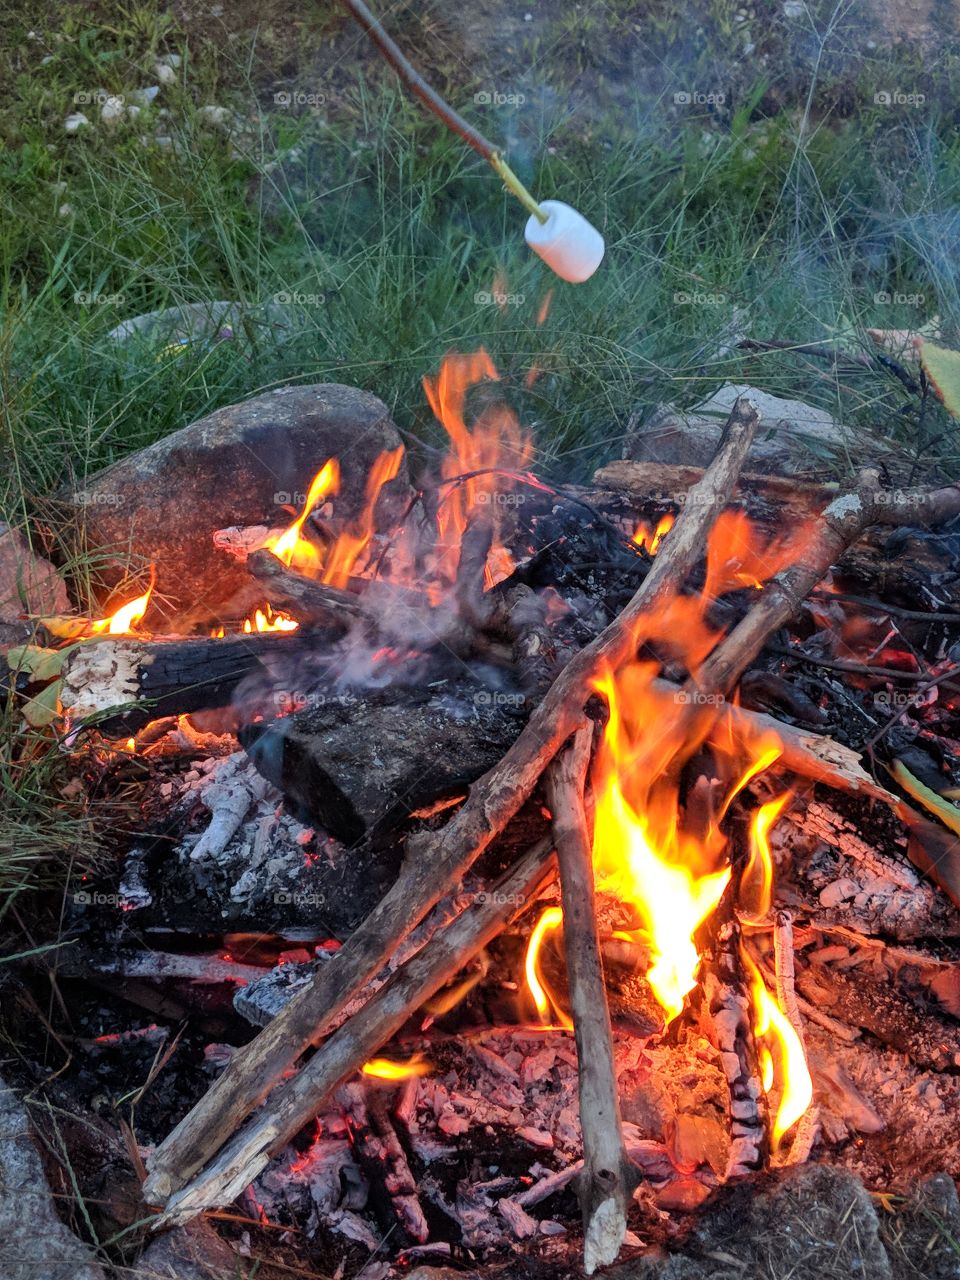 marshmallows over the fire